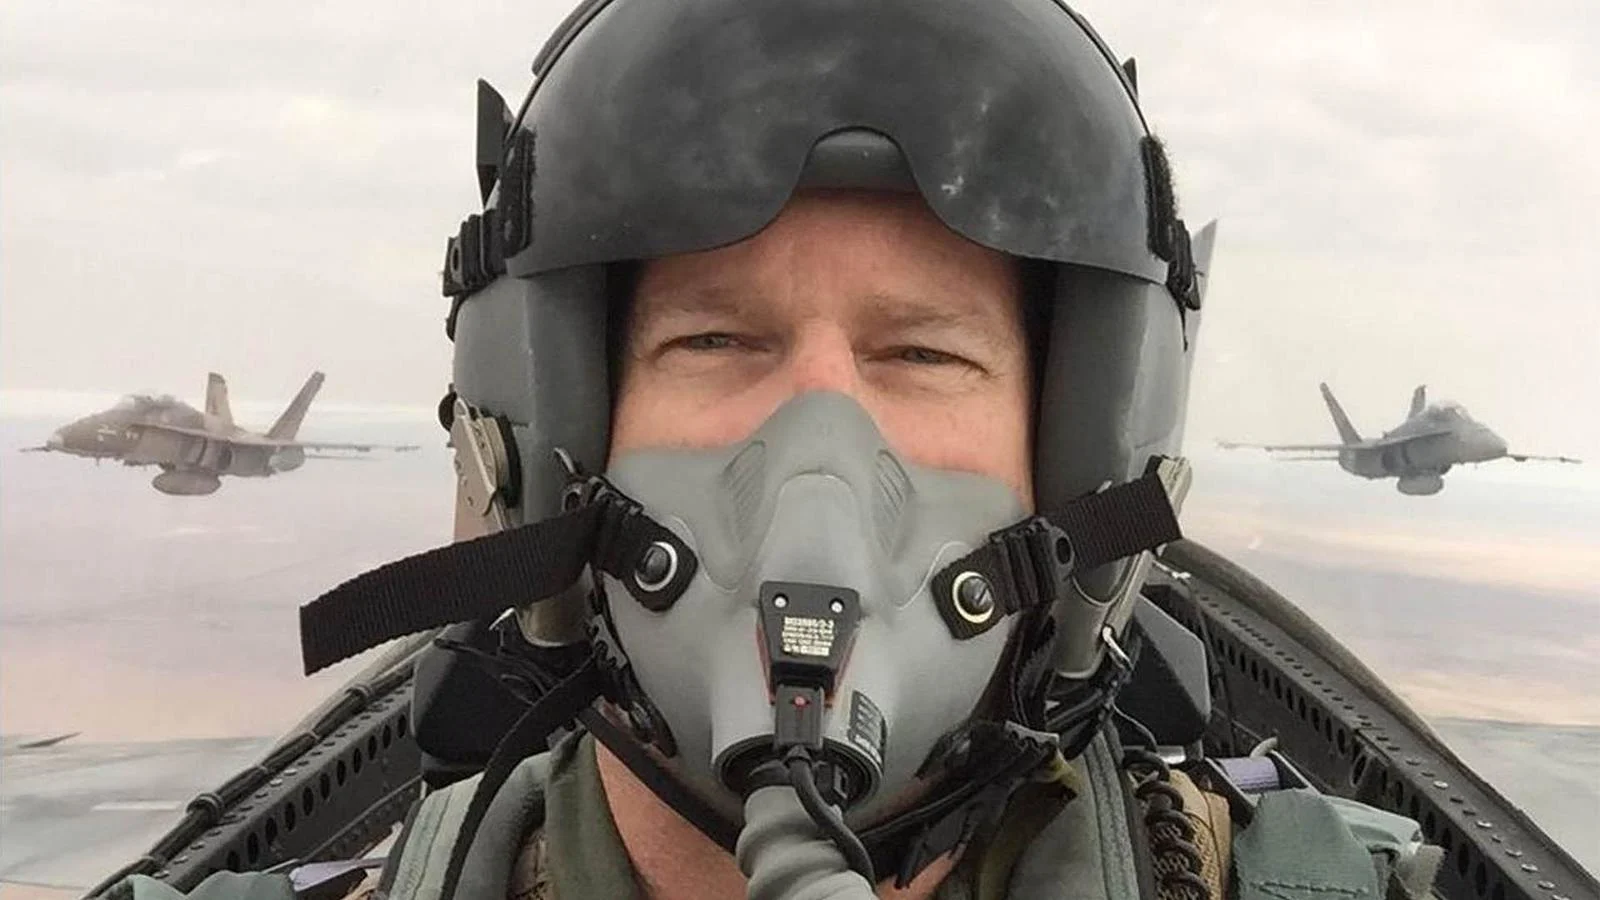 Boeing pilot notches 5,000 hours flying the F/A-18, a feat 'practically unheard of'